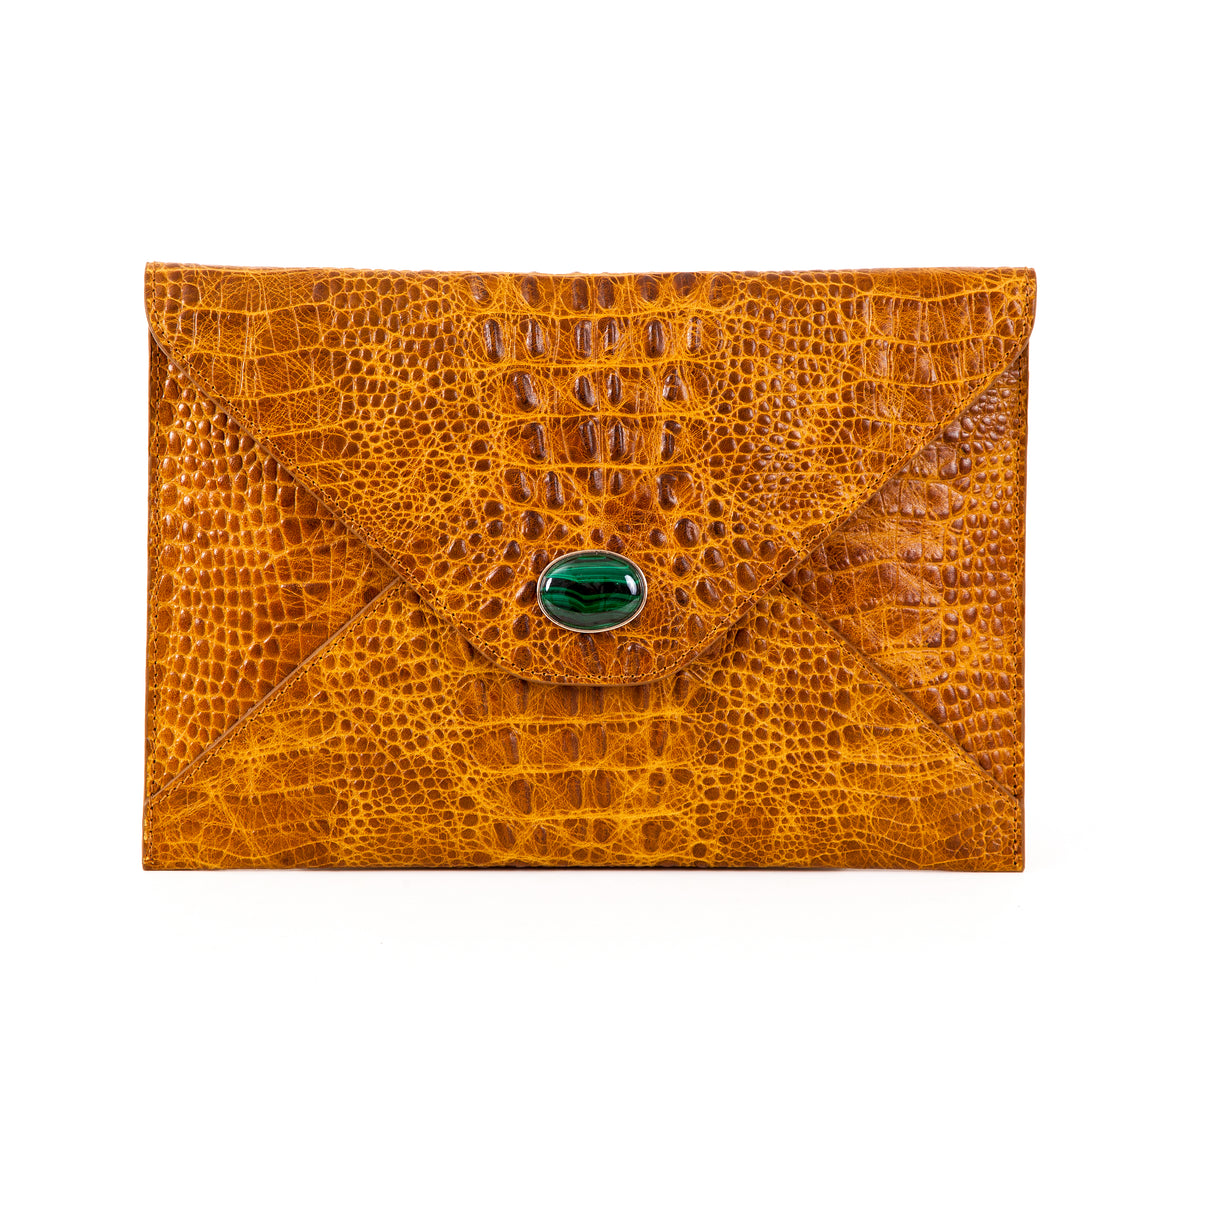 Envelopes of Madame Malachite sealed with her kiss, with our signature green malachite inner lining. Carry the magic of malachite everywhere you go.  %100 Leather (Embossed Croco)  Jeweled with natural malachite stone, 24K gold plated